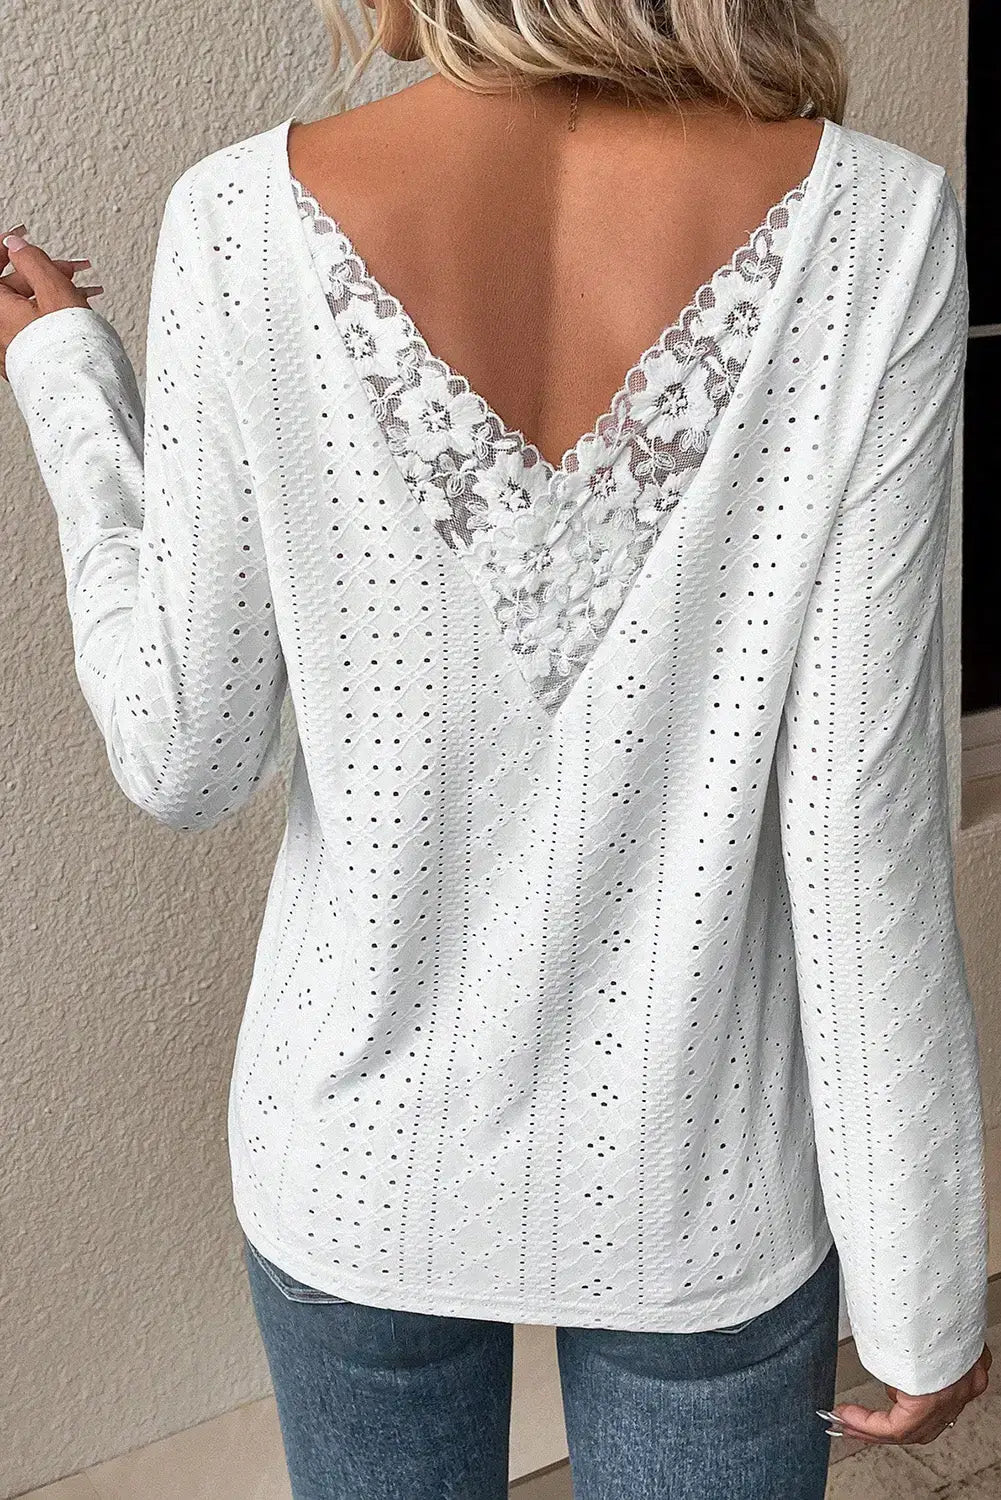 Light pink floral lace splicing eyelet long sleeve top - tops